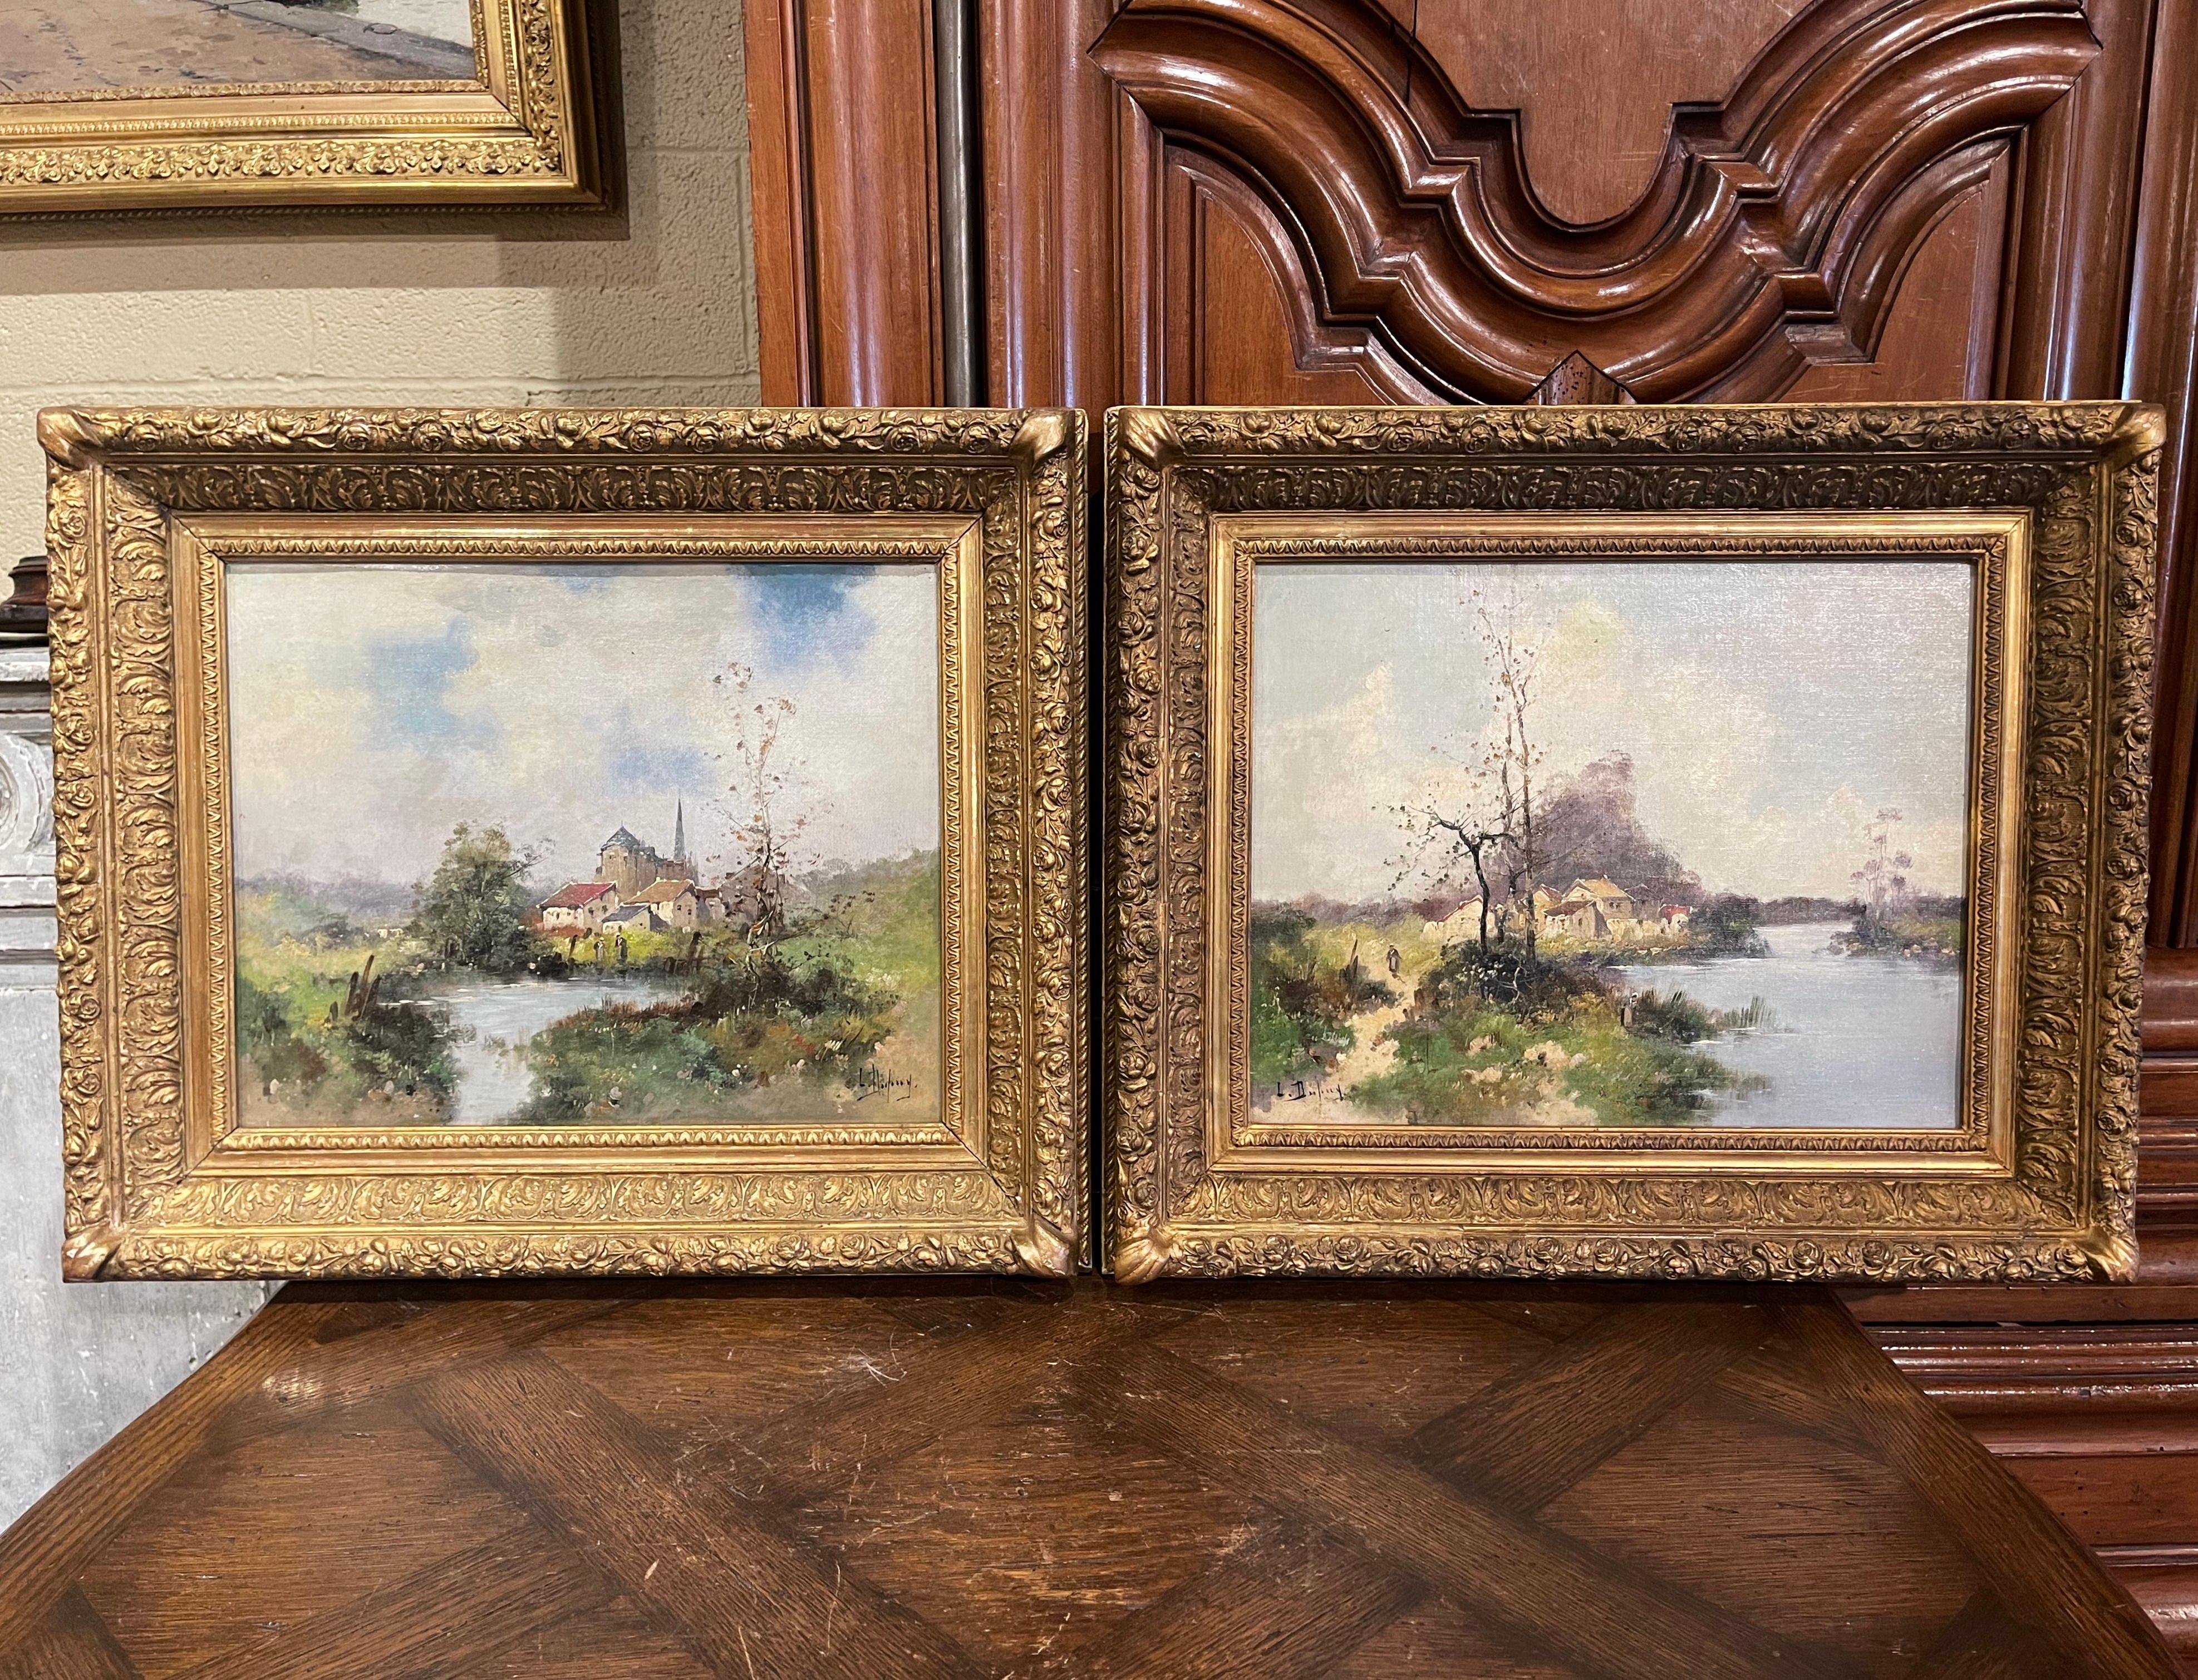 Canvas Pair of 19th Century Landscapes Paintings Signed L. Dupuy for E. Galien-Laloue For Sale